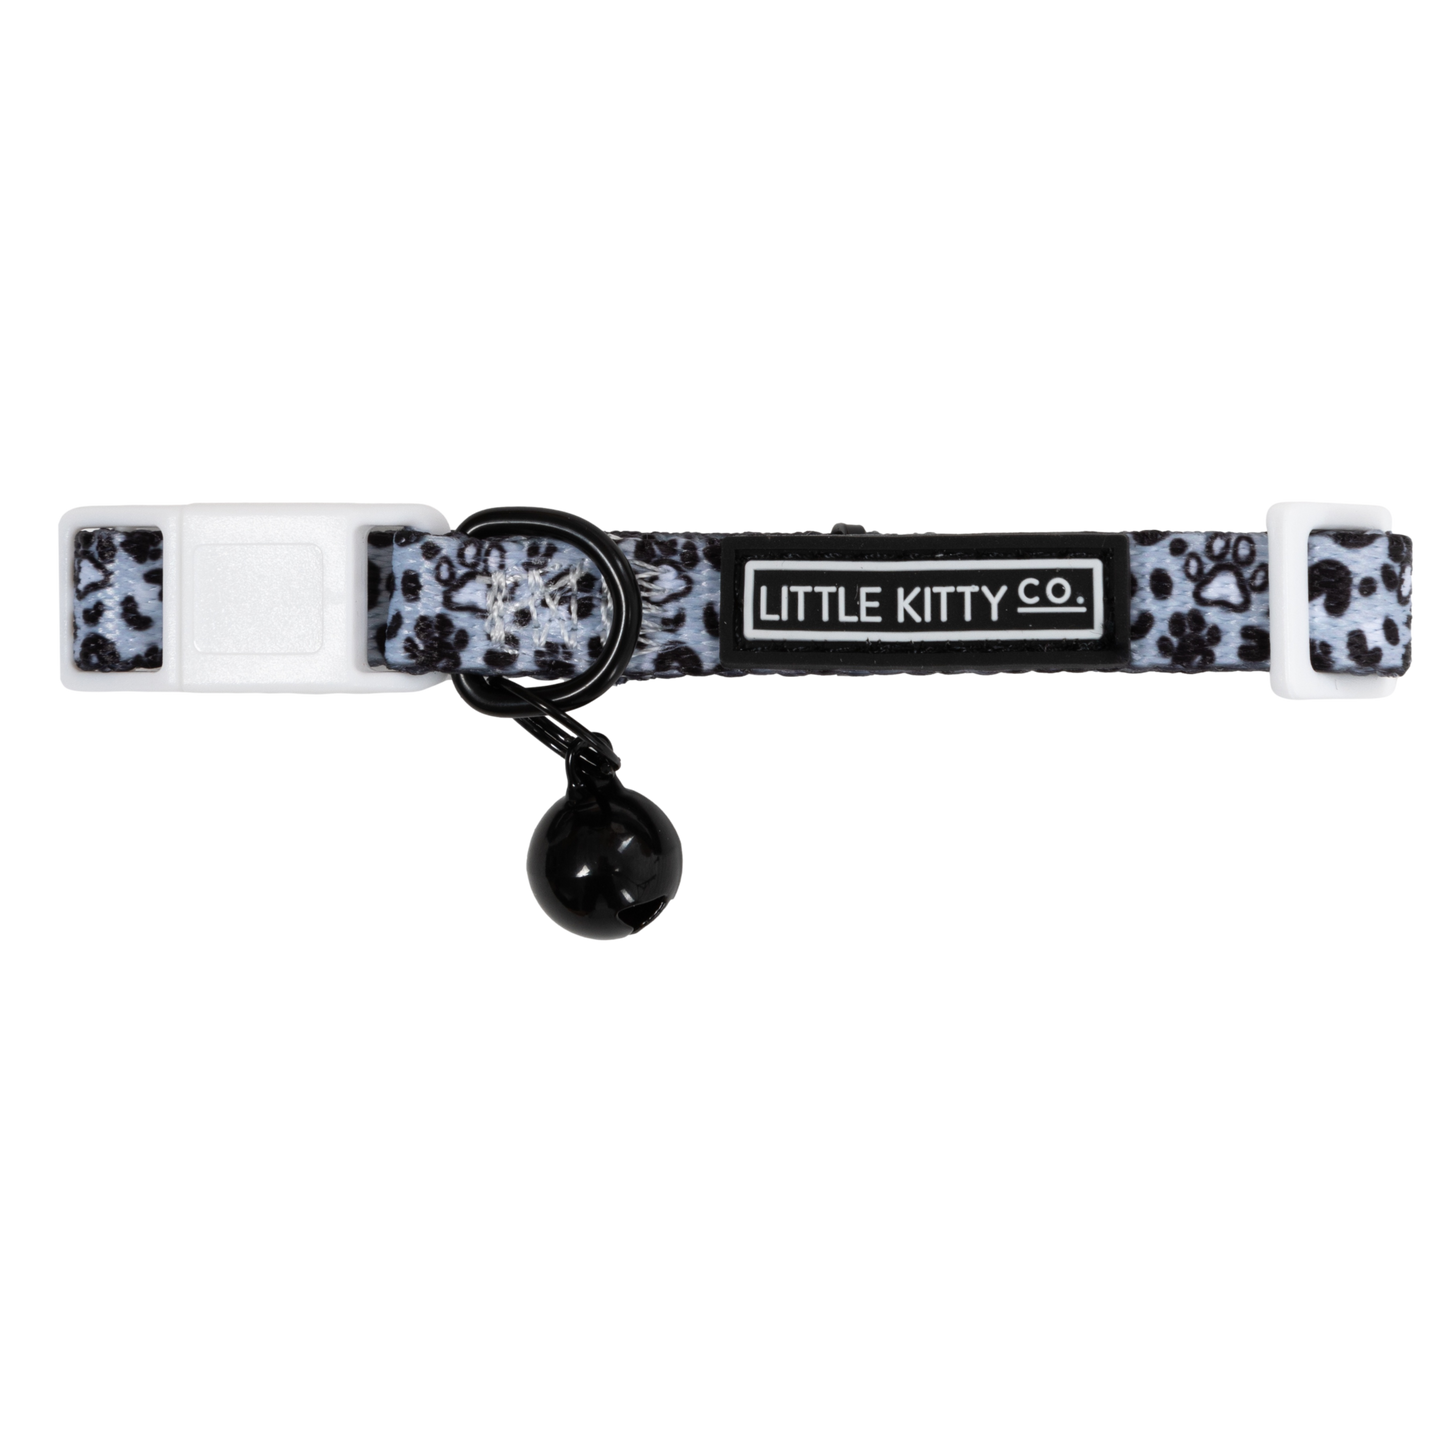 Cat Collar and Bow Tie Wild Paws Grey Black White Paw Prints Leopard Print